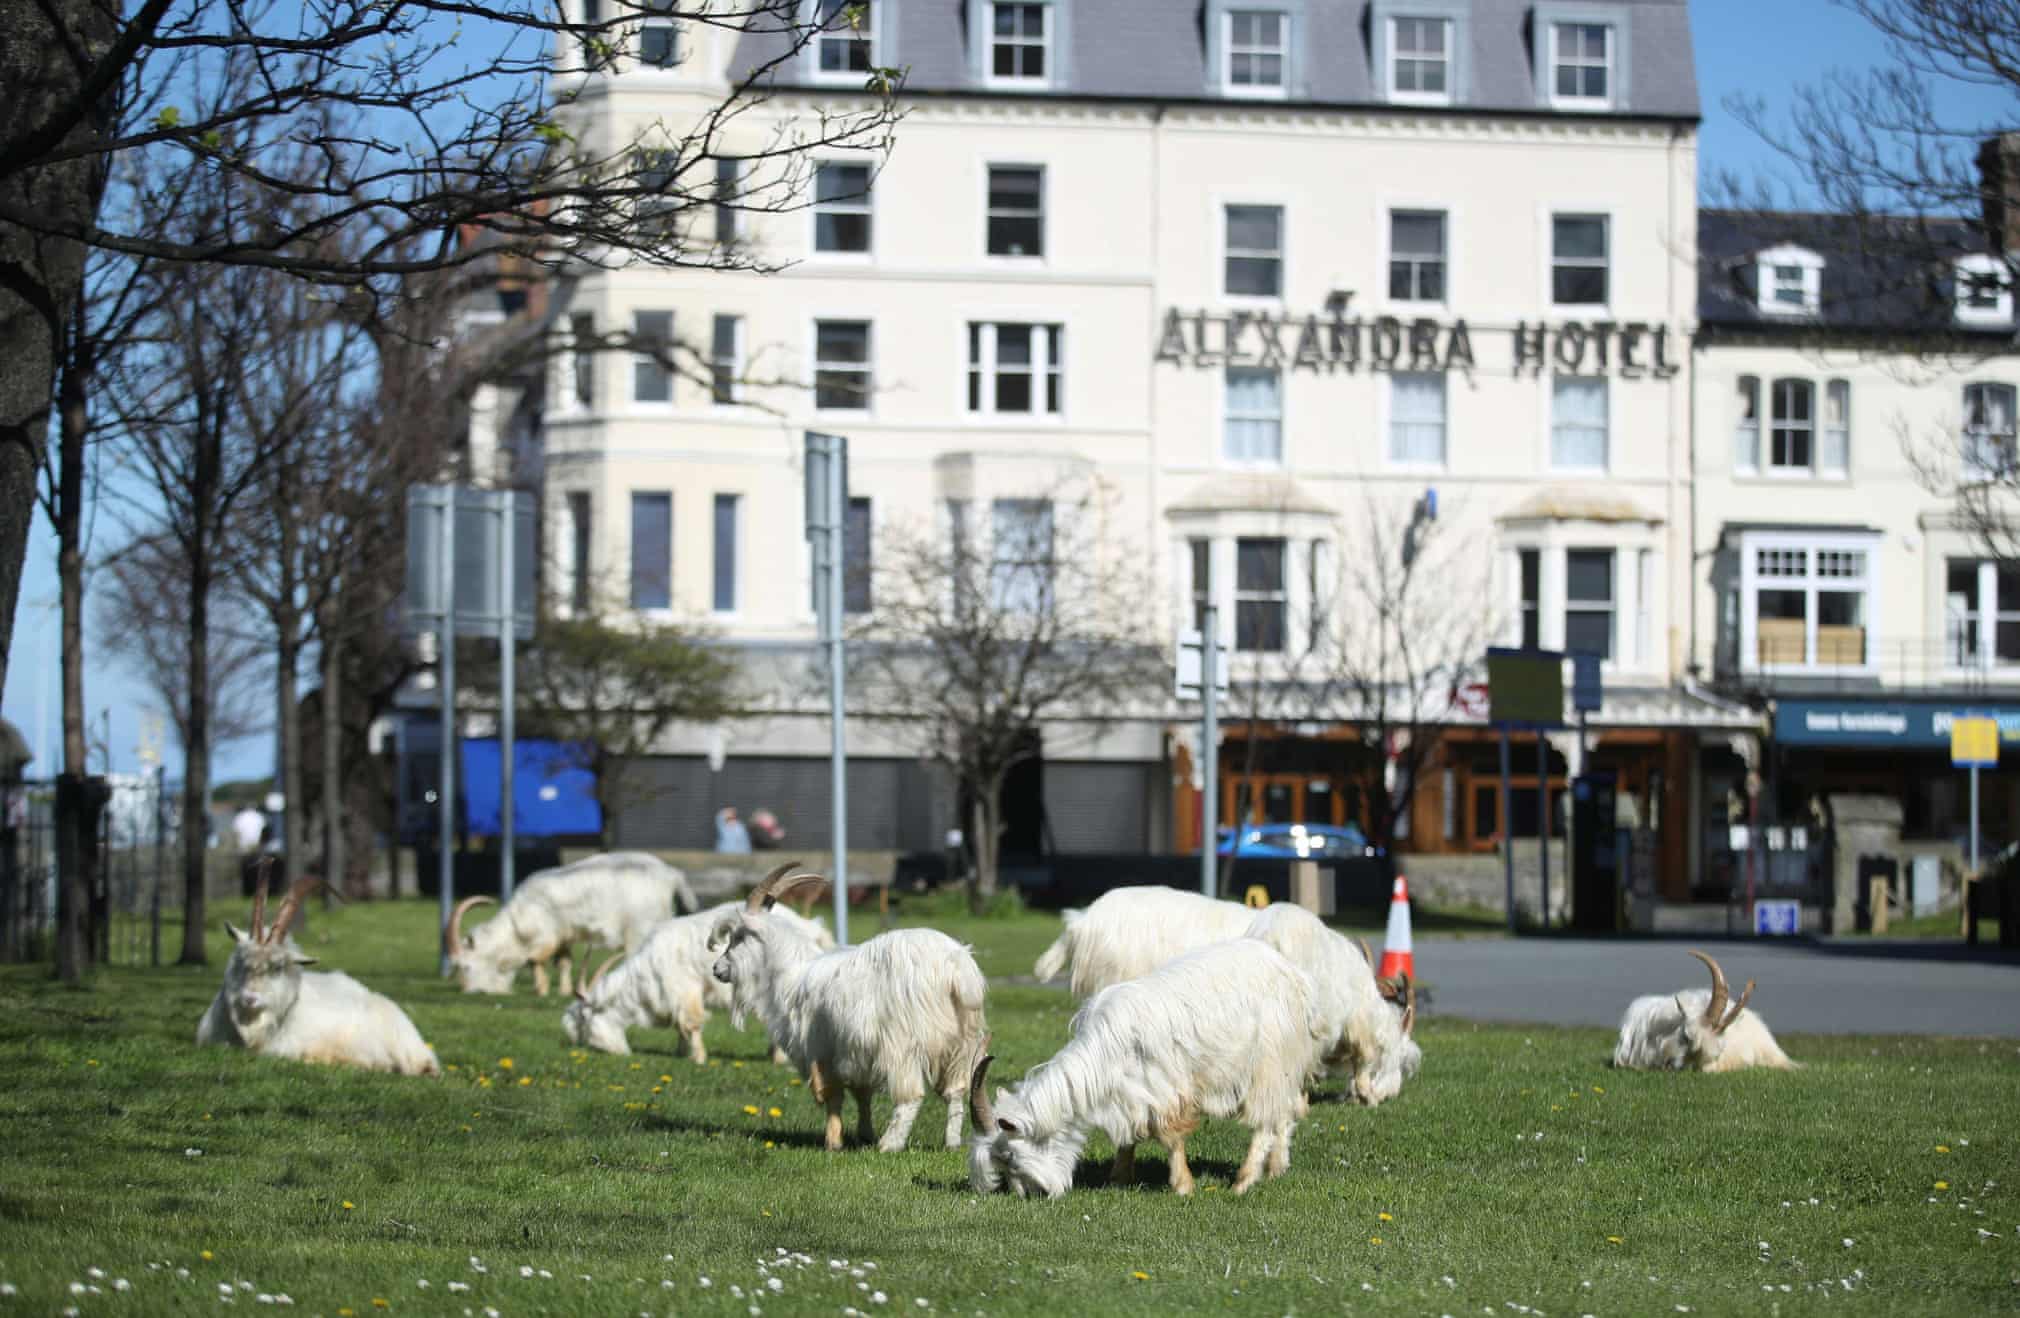 Cute, Fuzzy Mountain Goats Take Over Deserted Town After Covid-19 Forces Everyone To Stay Home - WORLD OF BUZZ